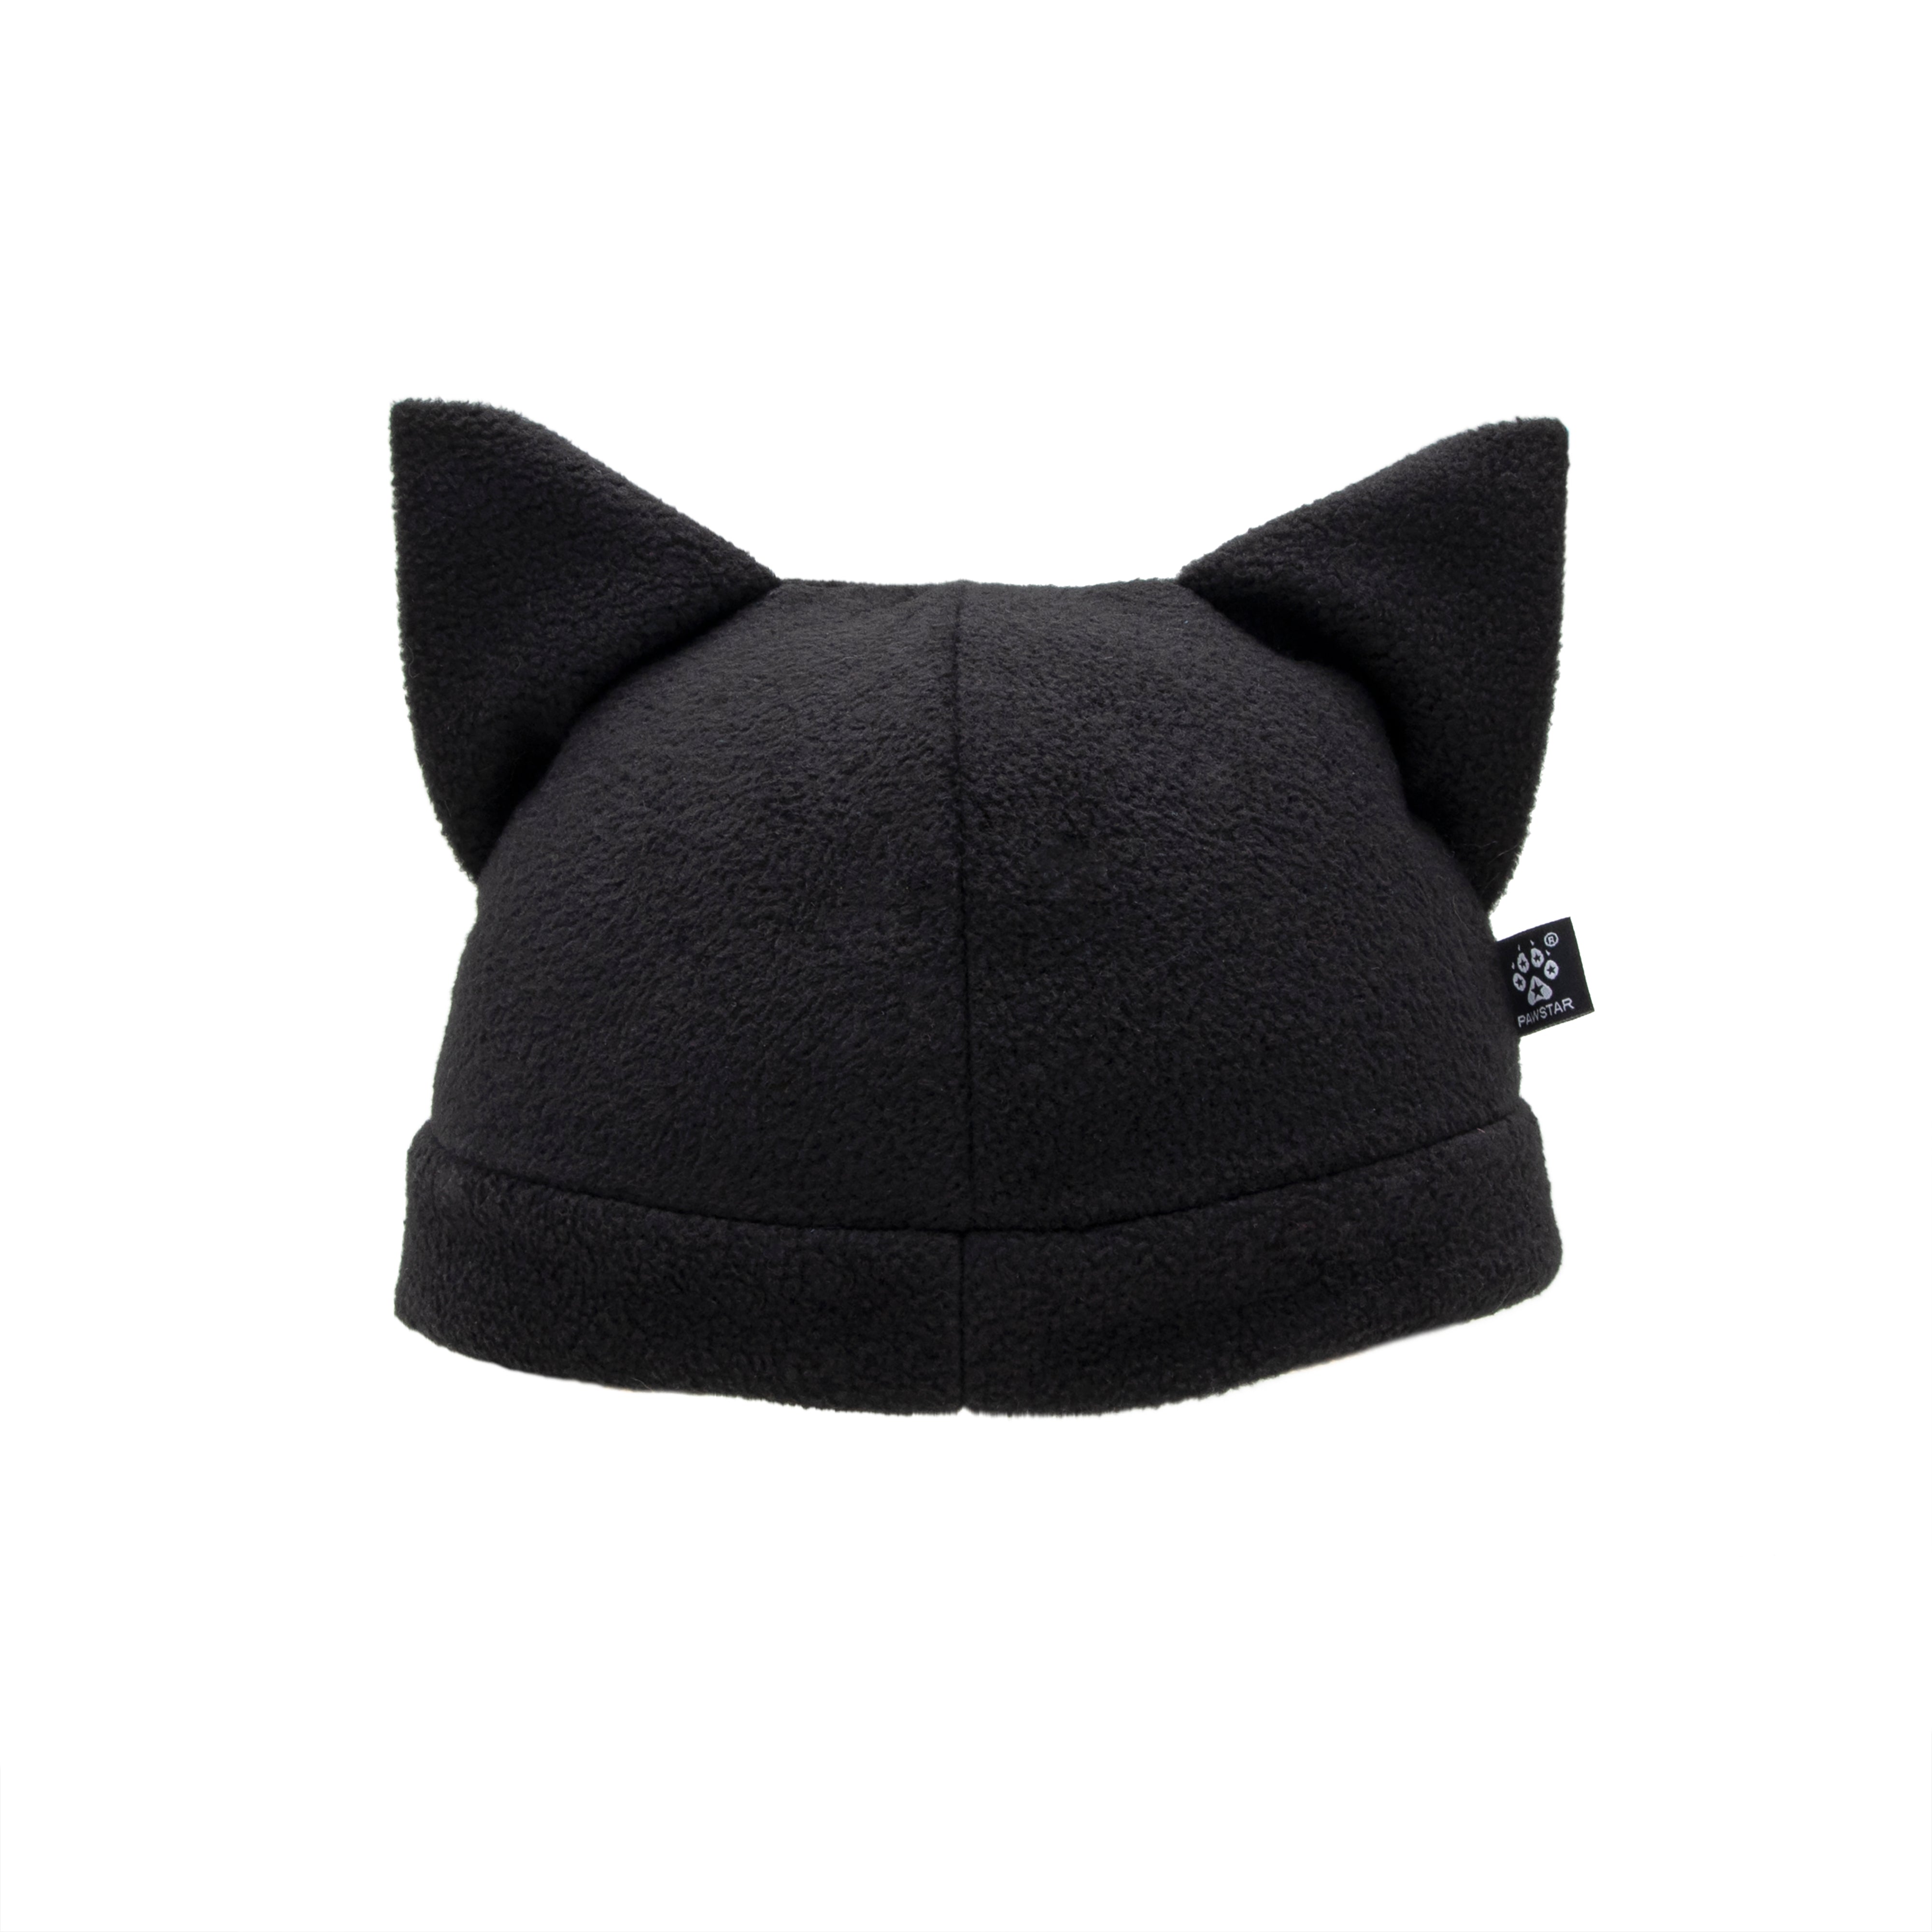  Thimbles the ragdoll kitty cat hat. Great for halloween costume and furry cosplay.